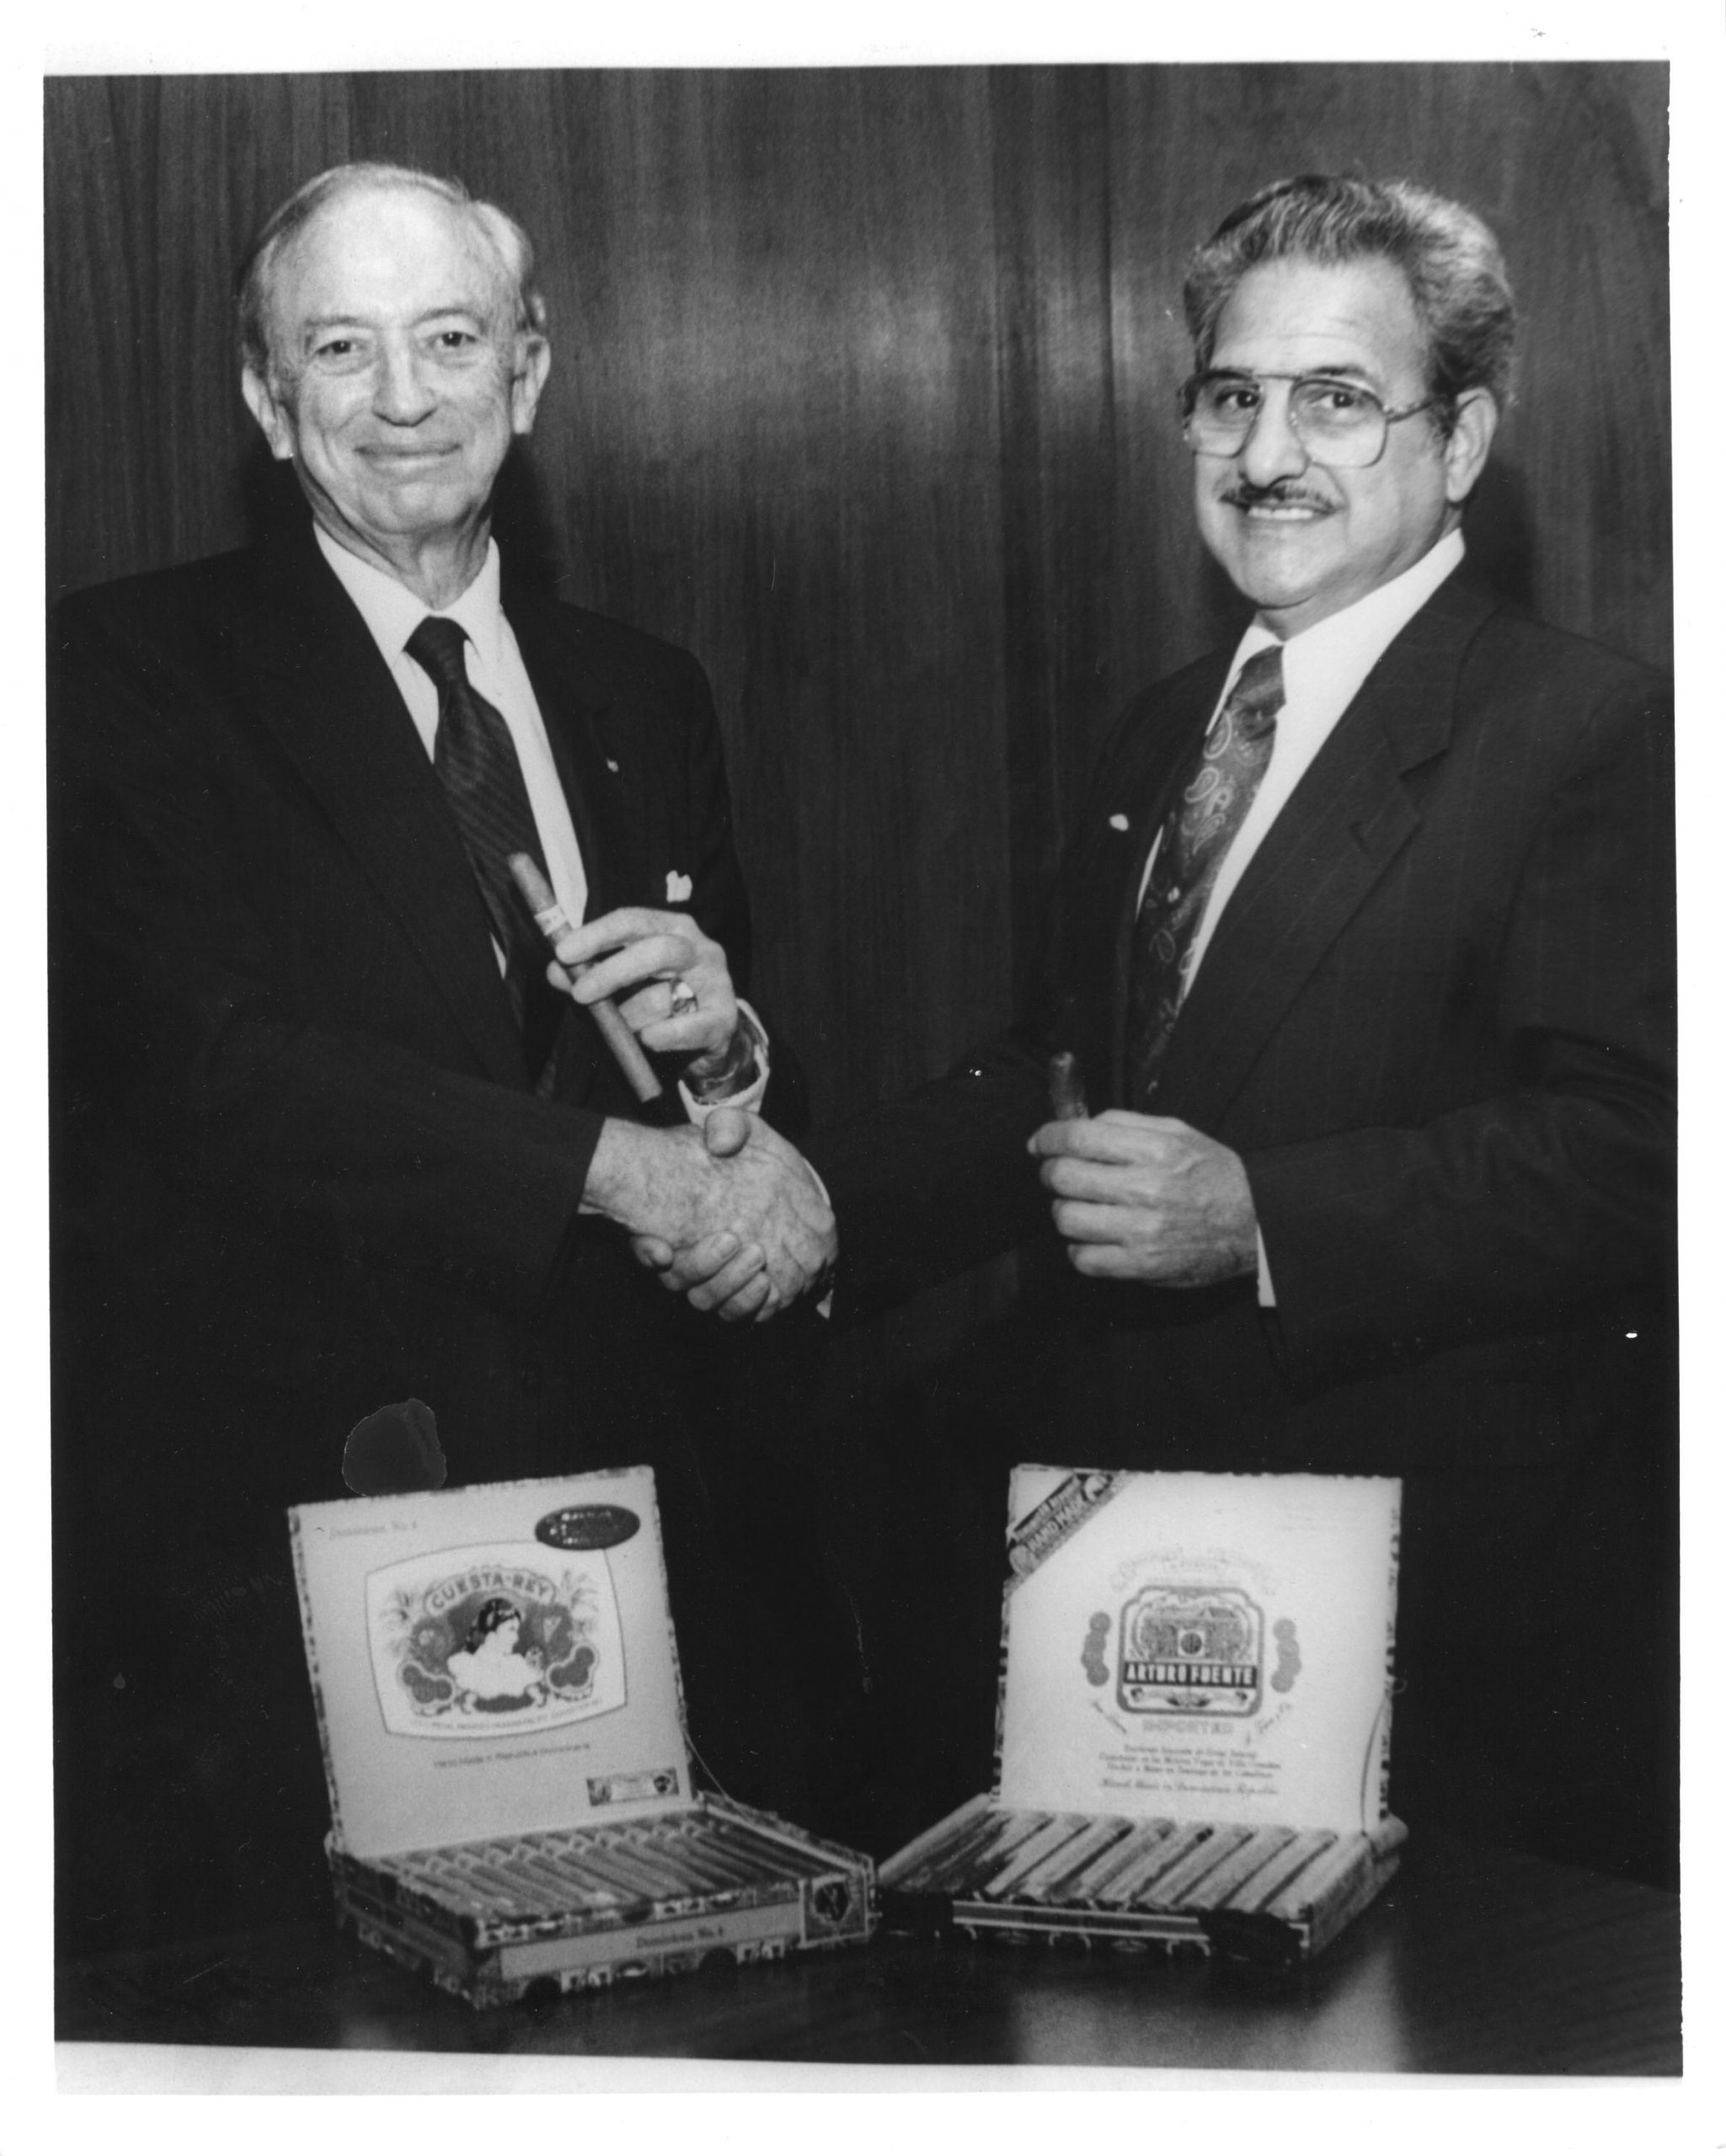 Carlos Fuente Sr. and Stanford Newman Shake Hands over cigar boxes